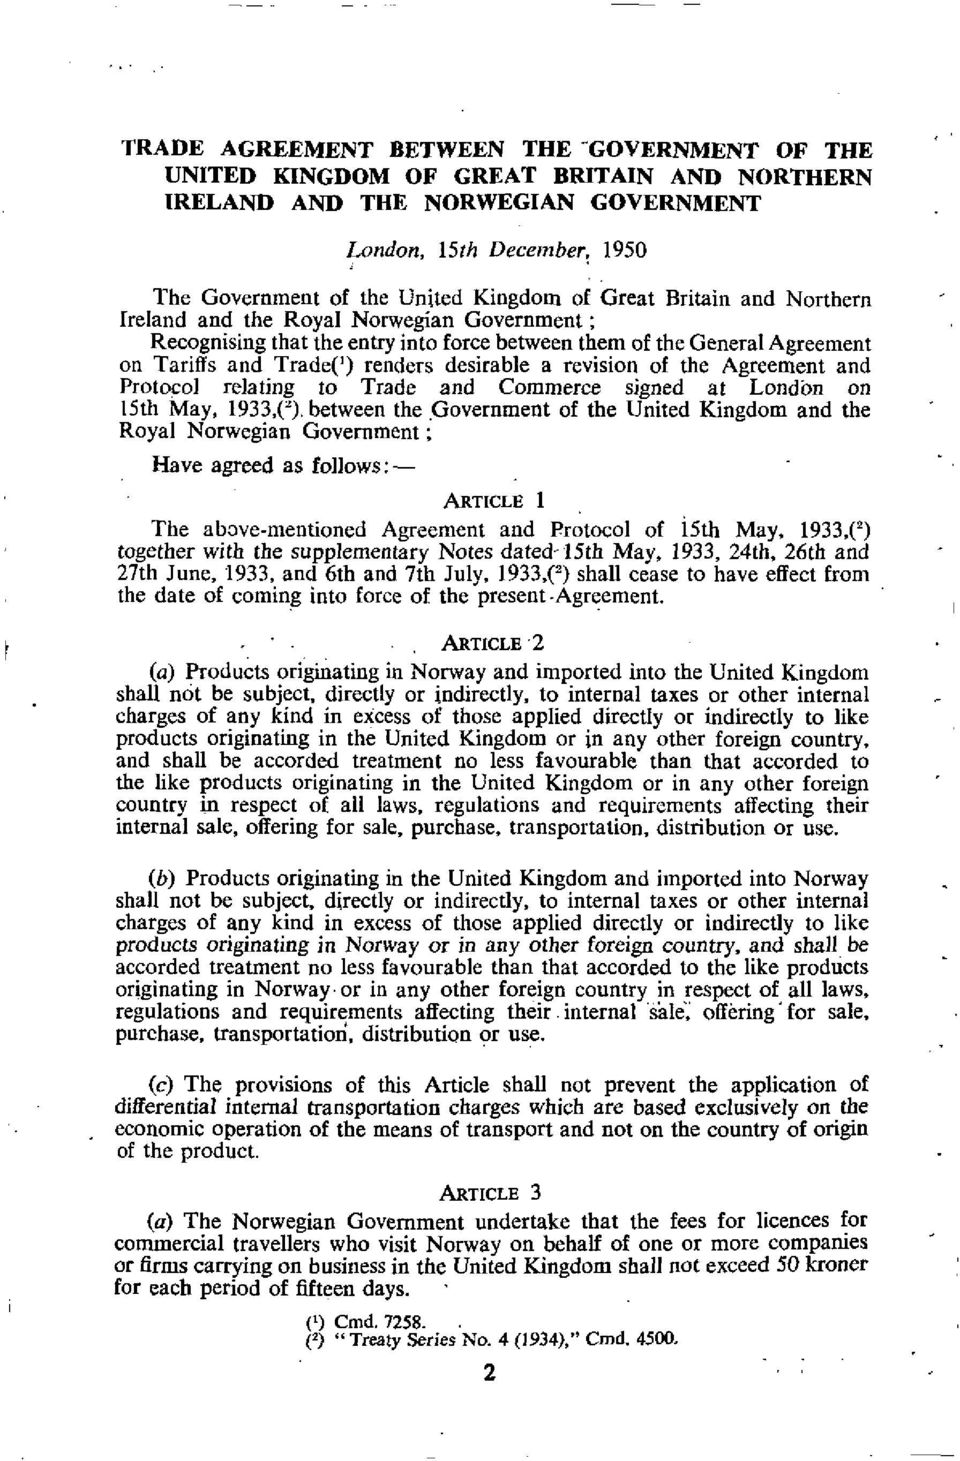 revision of the Agreement and Protocol relating to Trade and Commerce signed at London on 15th May, 1933,(), between the Government of the United Kingdom and the Royal Norwegian Government : Have